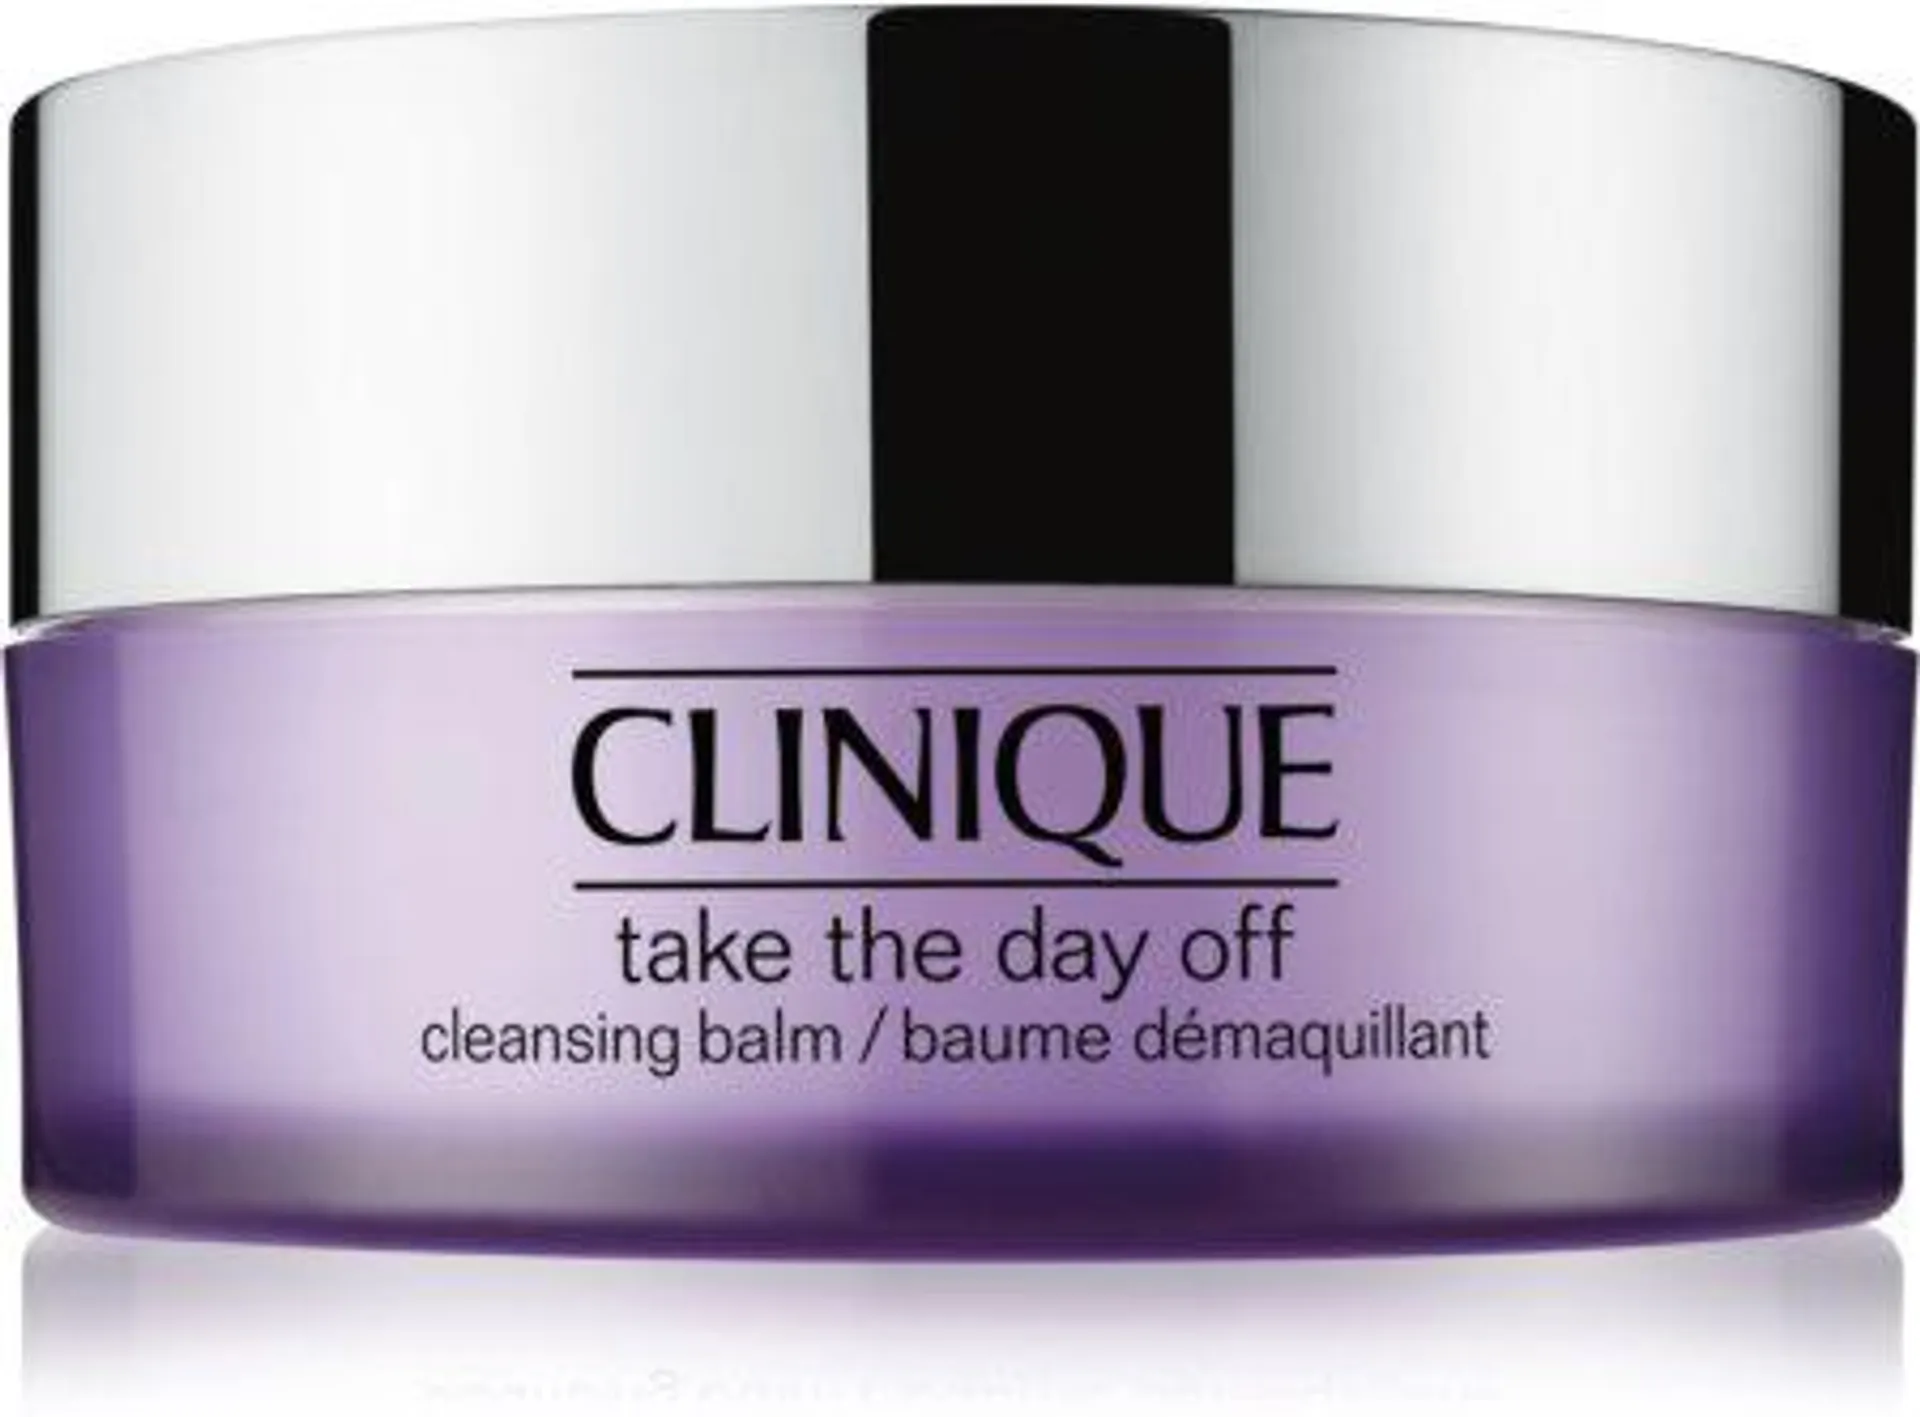 Take The Day Off™ Cleansing Balm